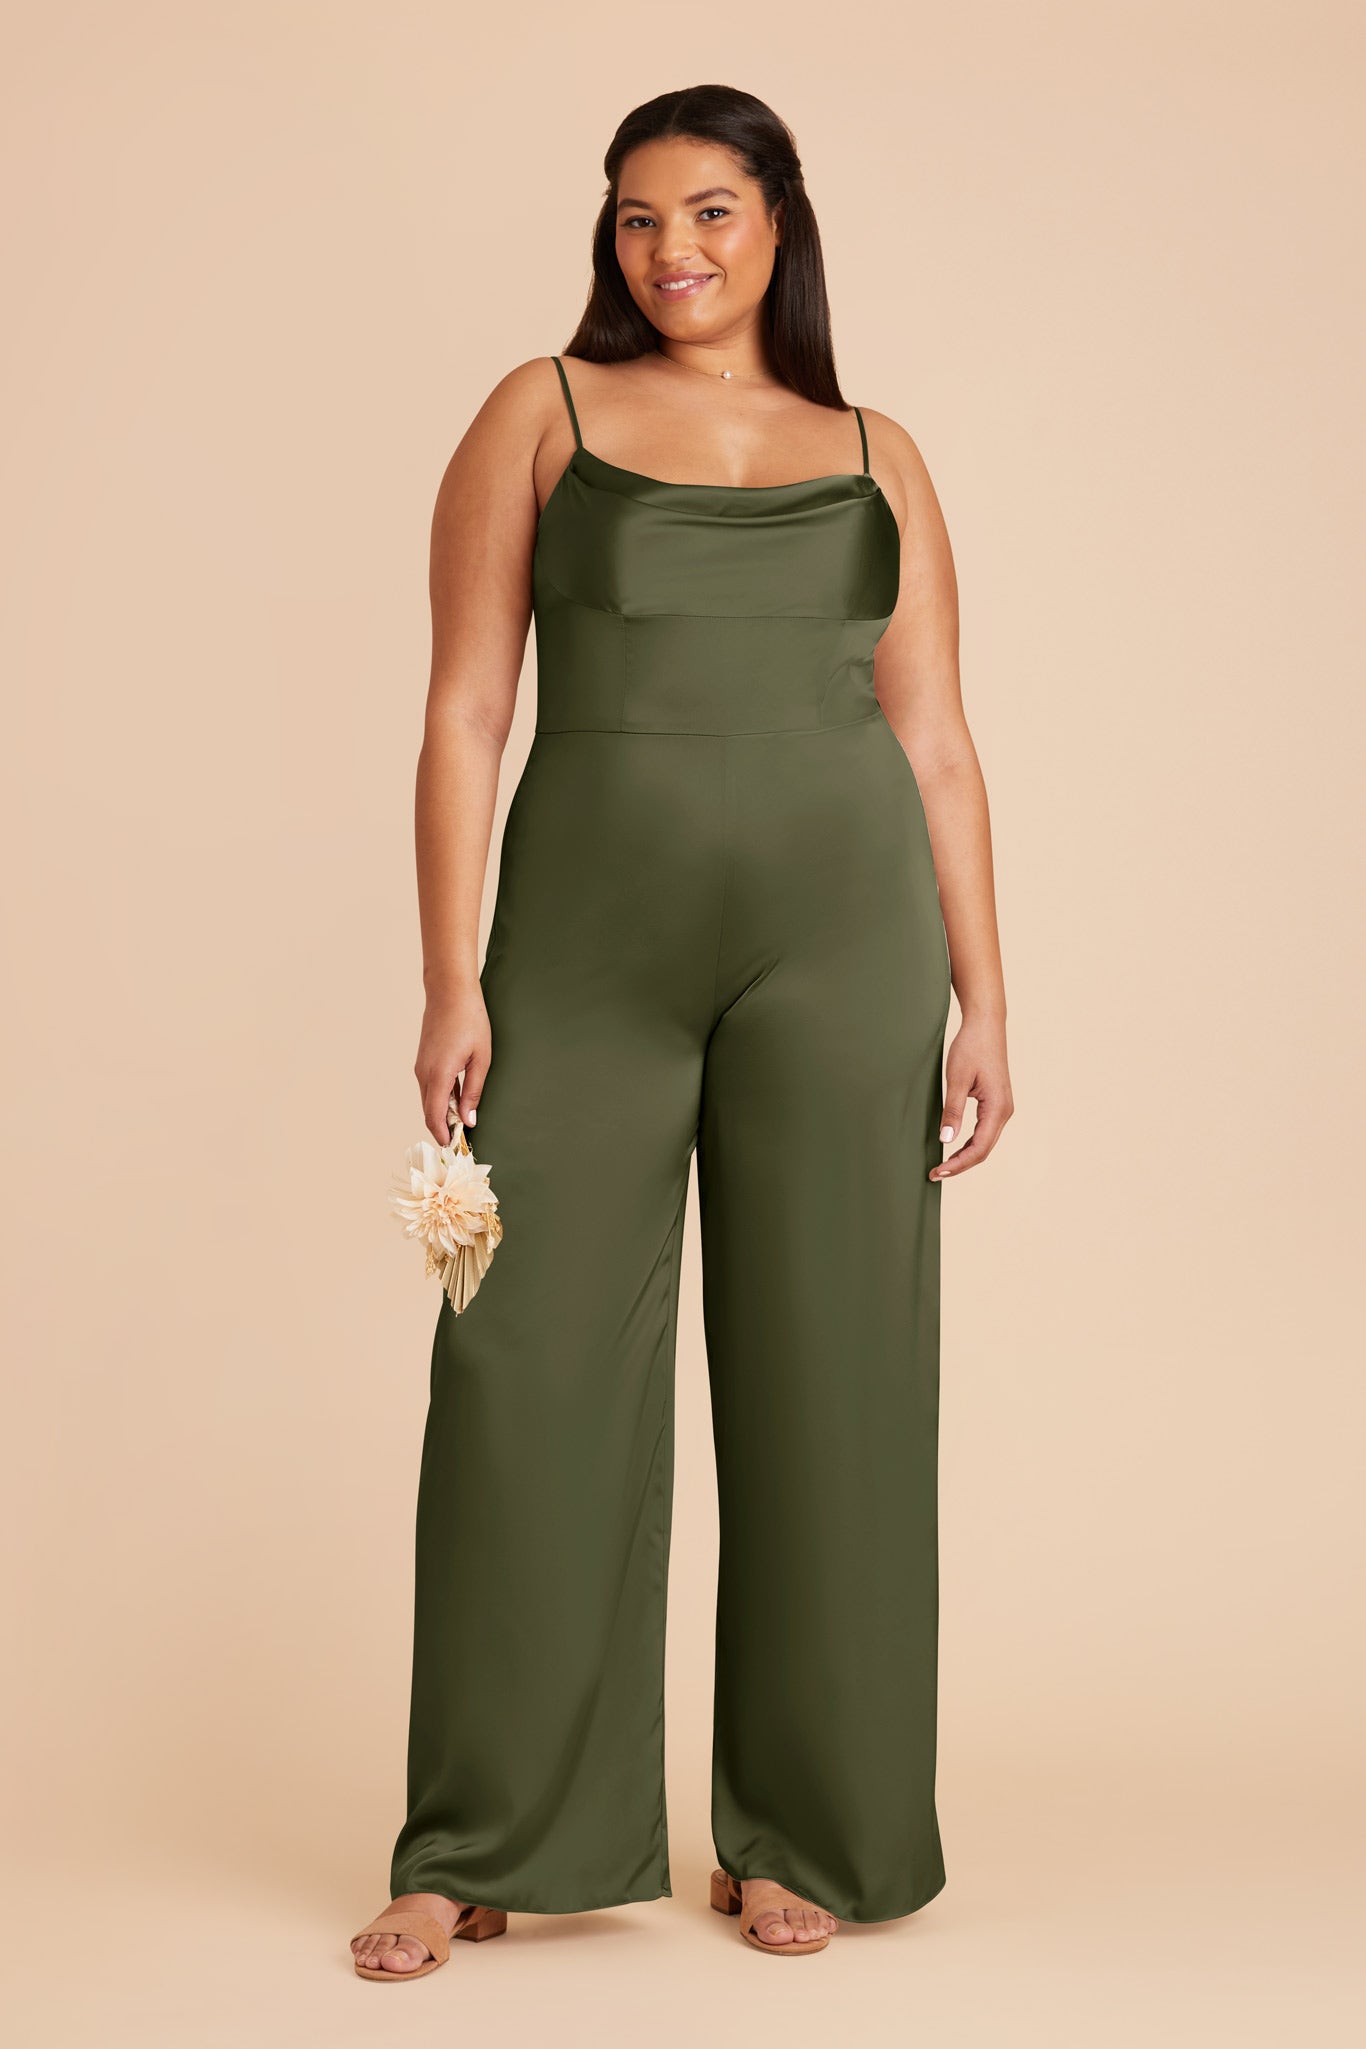 Olive Donna Matte Satin Bridesmaid Jumpsuit by Birdy Grey